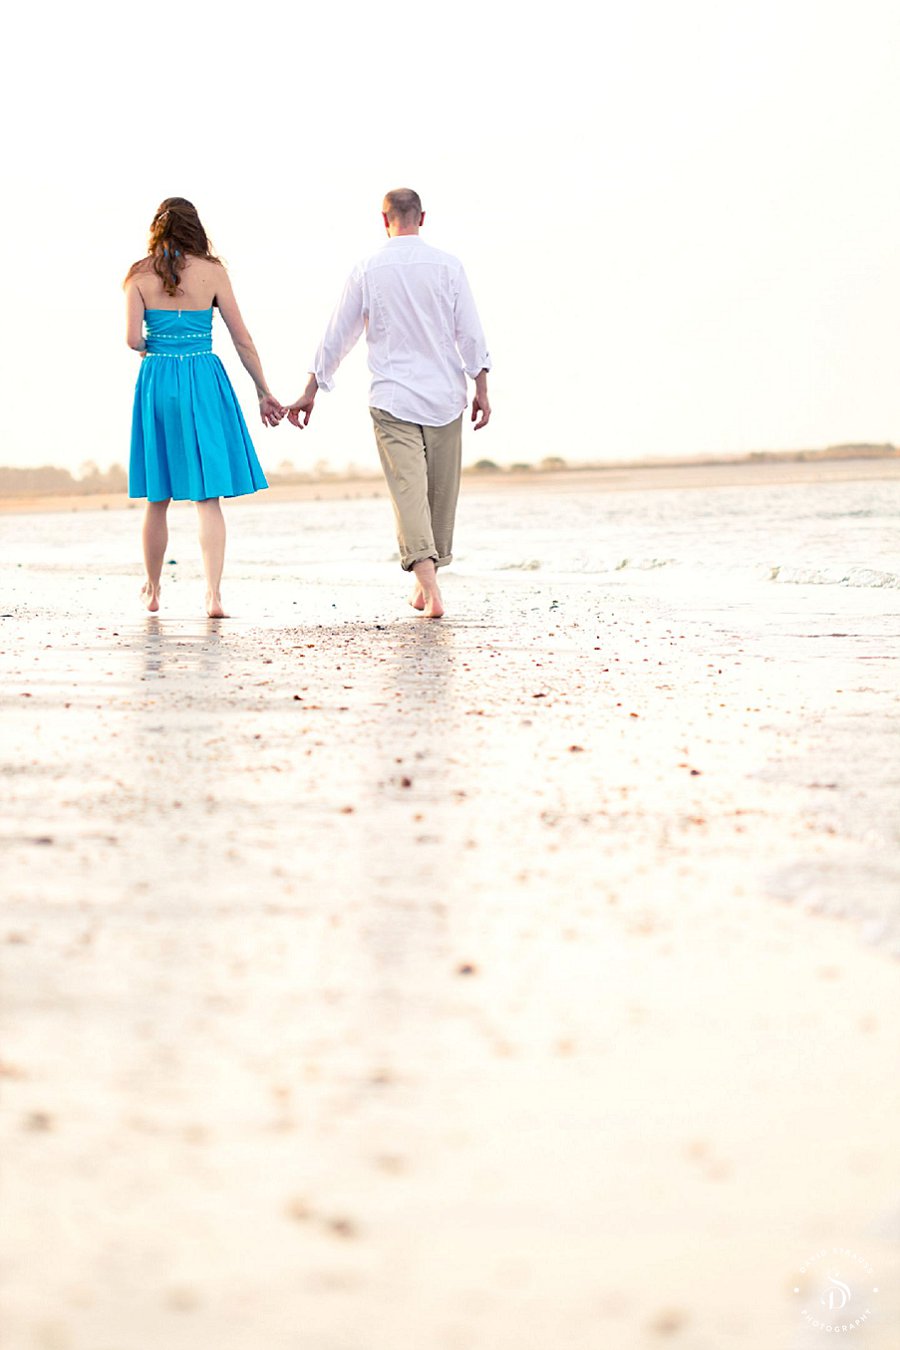 Charleston Engagement Pictures - Downtown - Folly Beach - Pali and Laura - 7